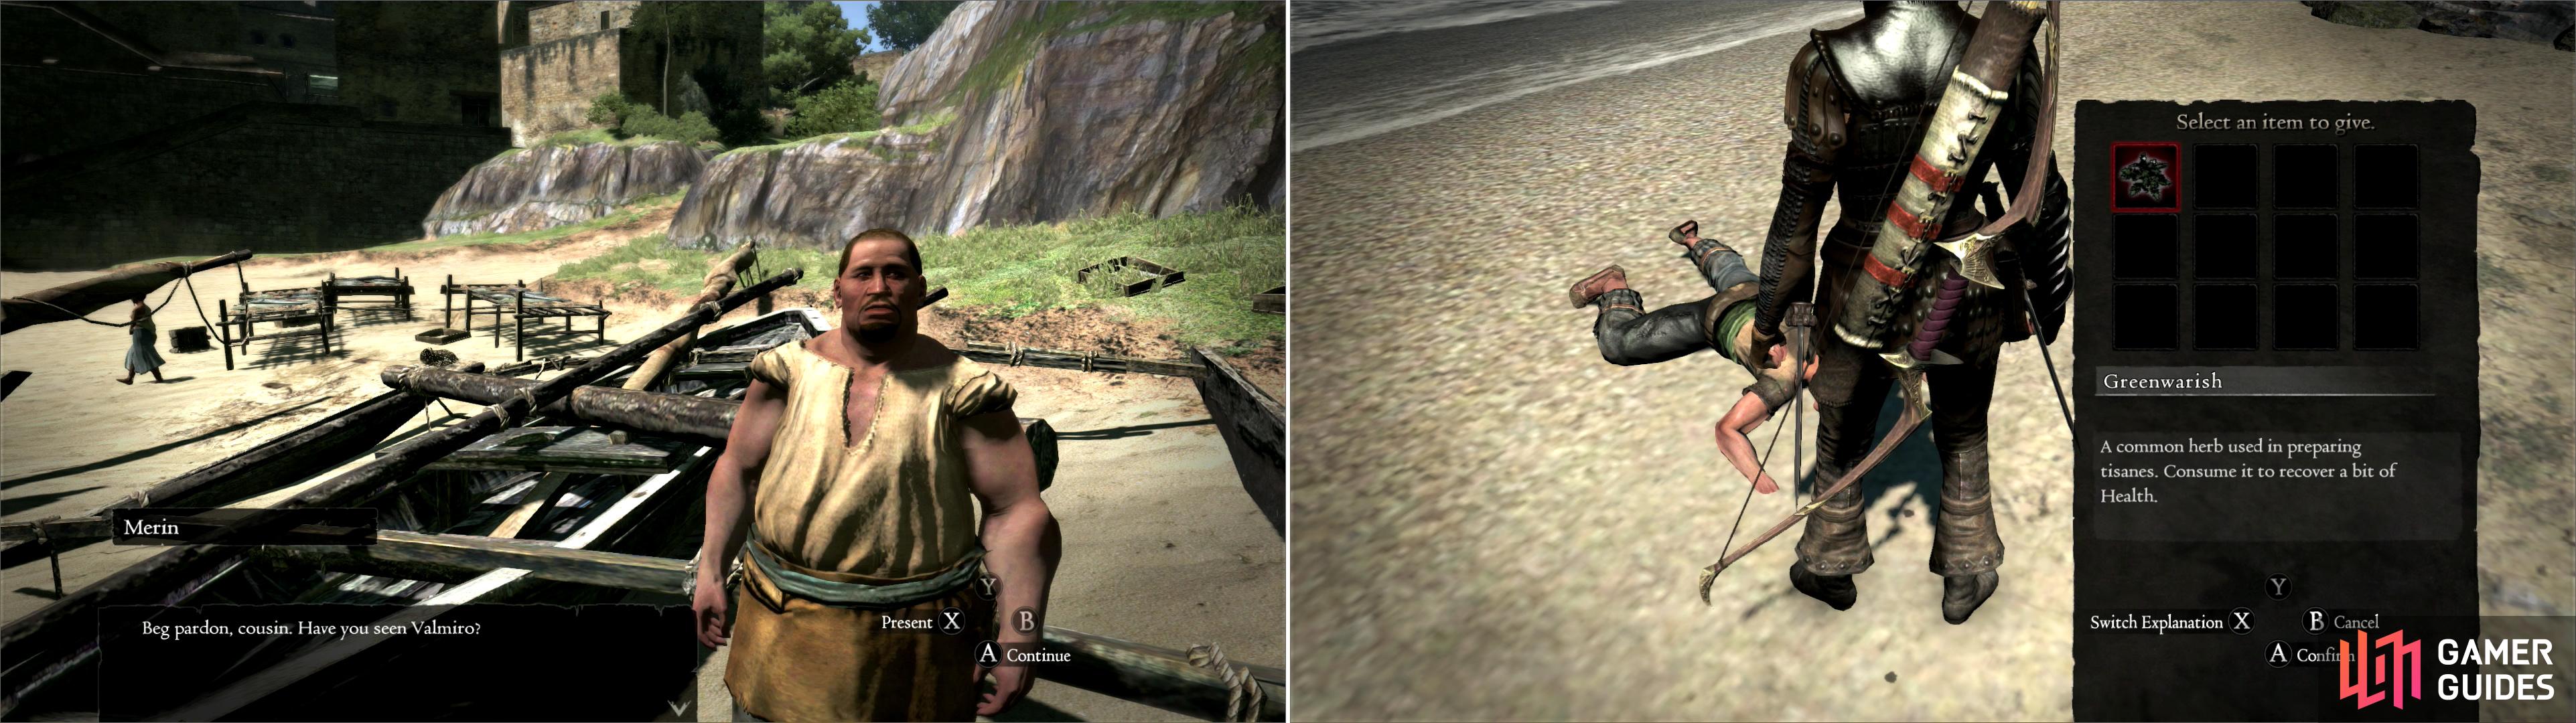 Find Merin around town and he’ll ask you to go find the wayward Valmiro (left). The reckless would-be explorer can be found first on the beach of Seabreeze Trail (right) and later near the Encampment. Provide him Greenwarish to revive him.